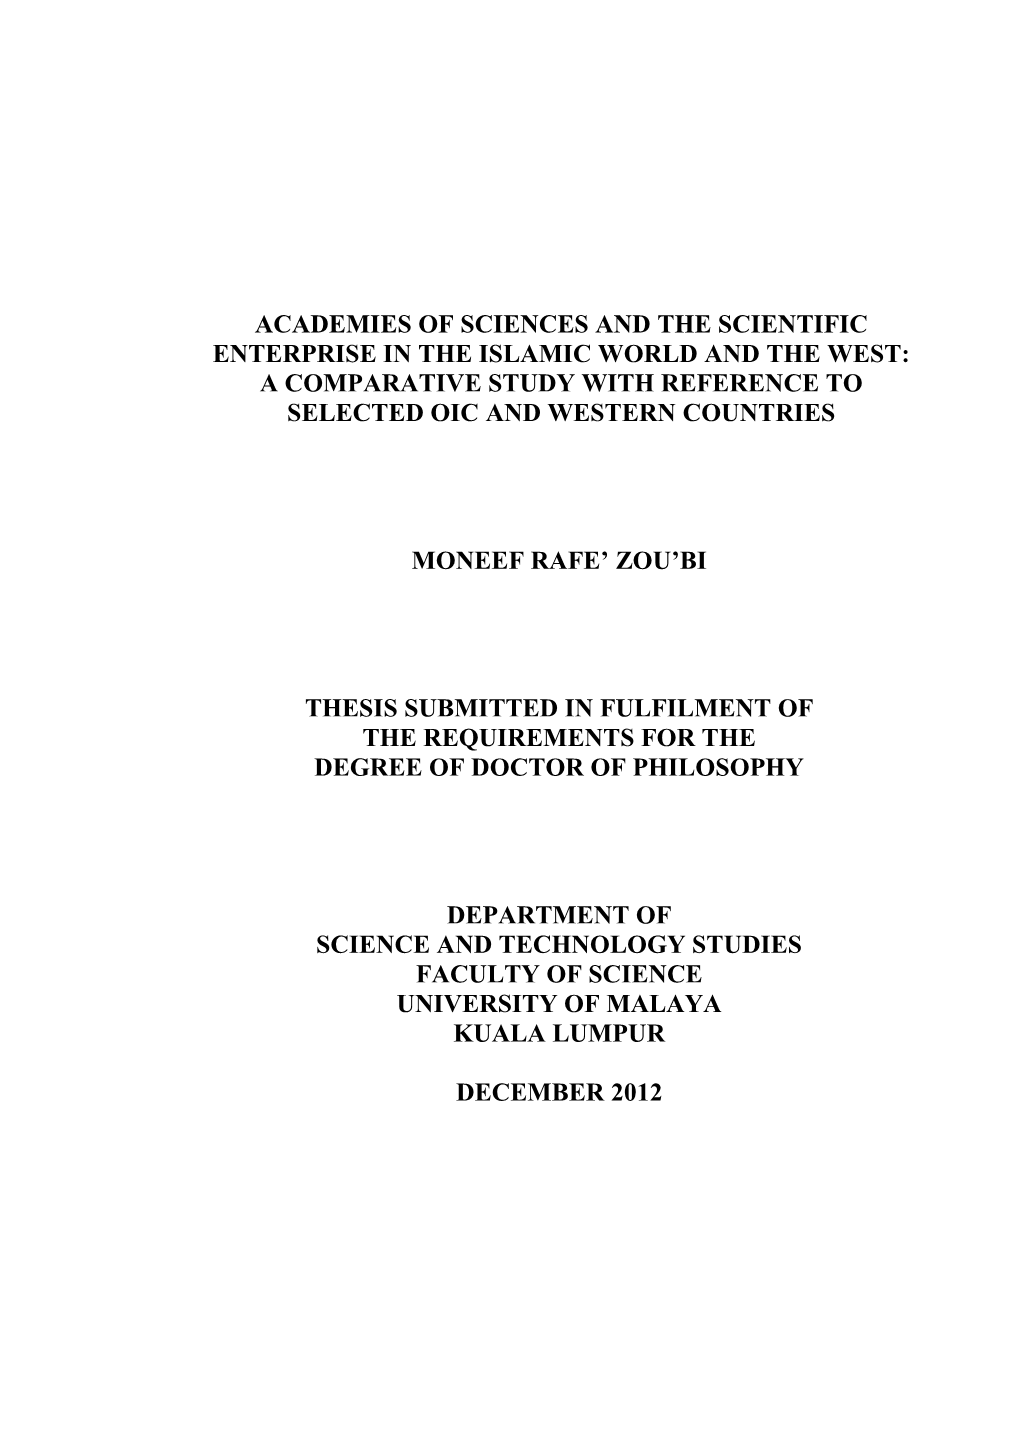 Proposed Titles of Thesis